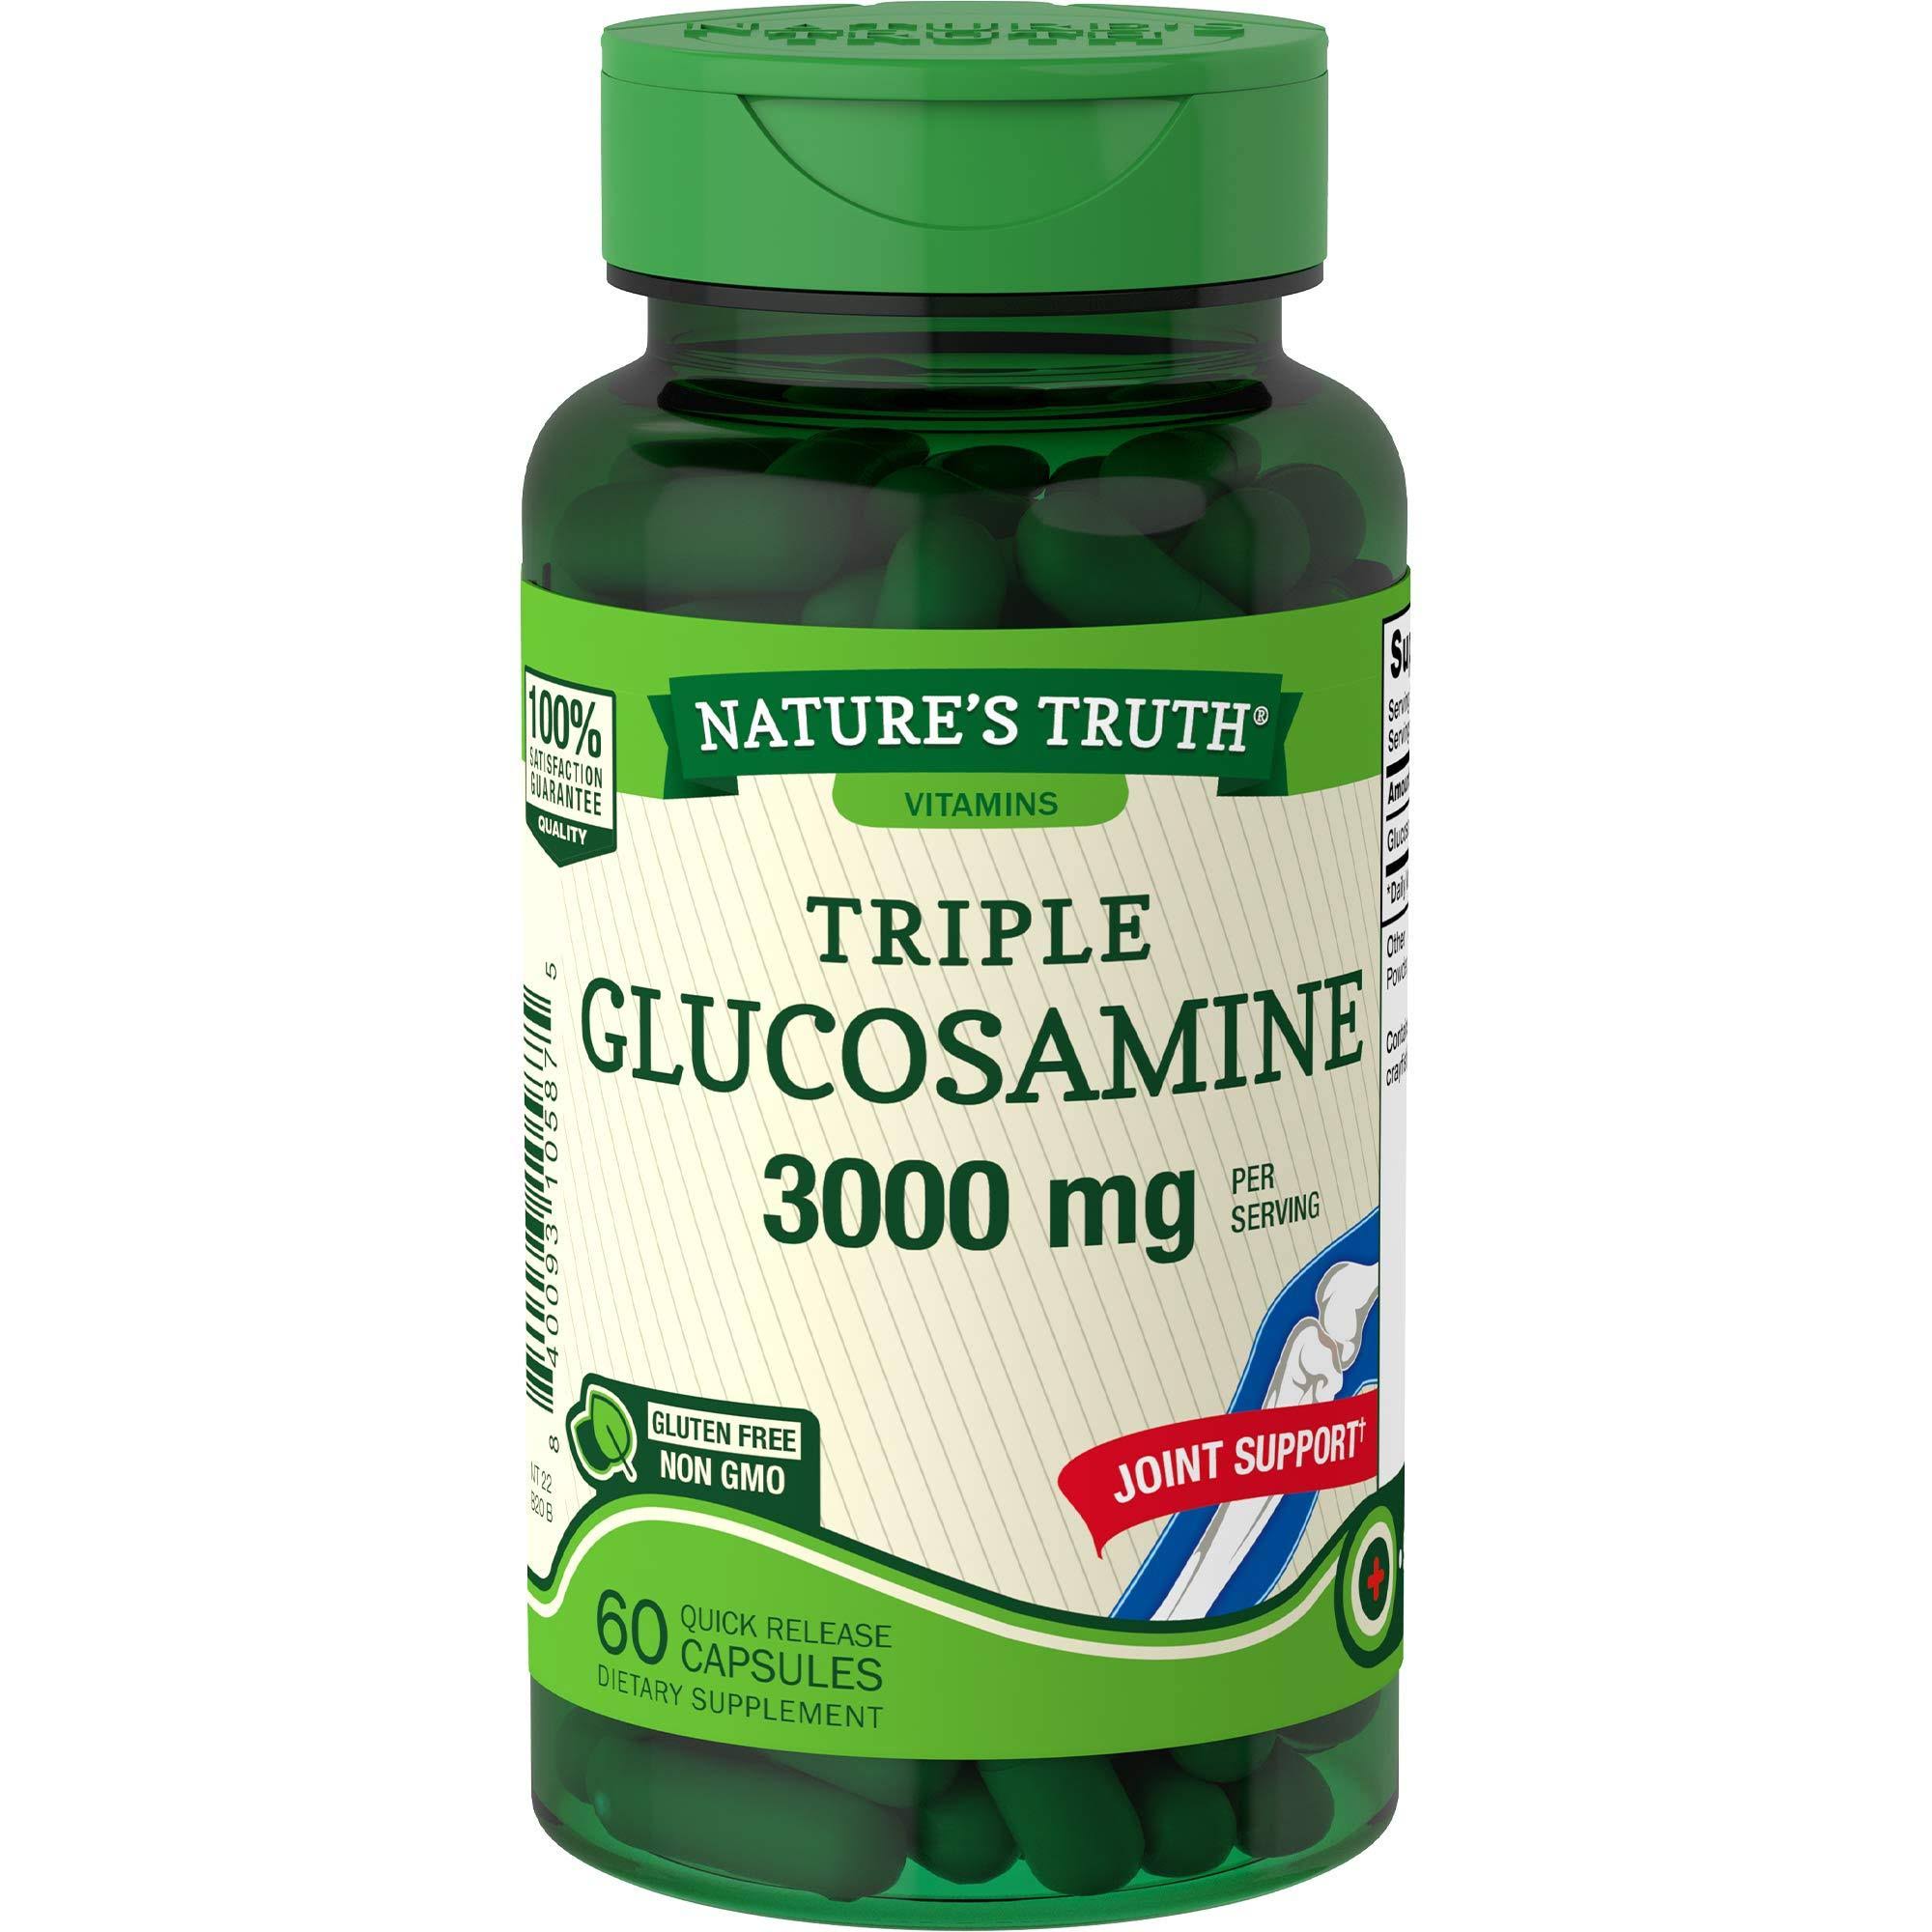 Nature's Truth Triple Glucosamine Dietary Supplement - 3000mg, 60ct